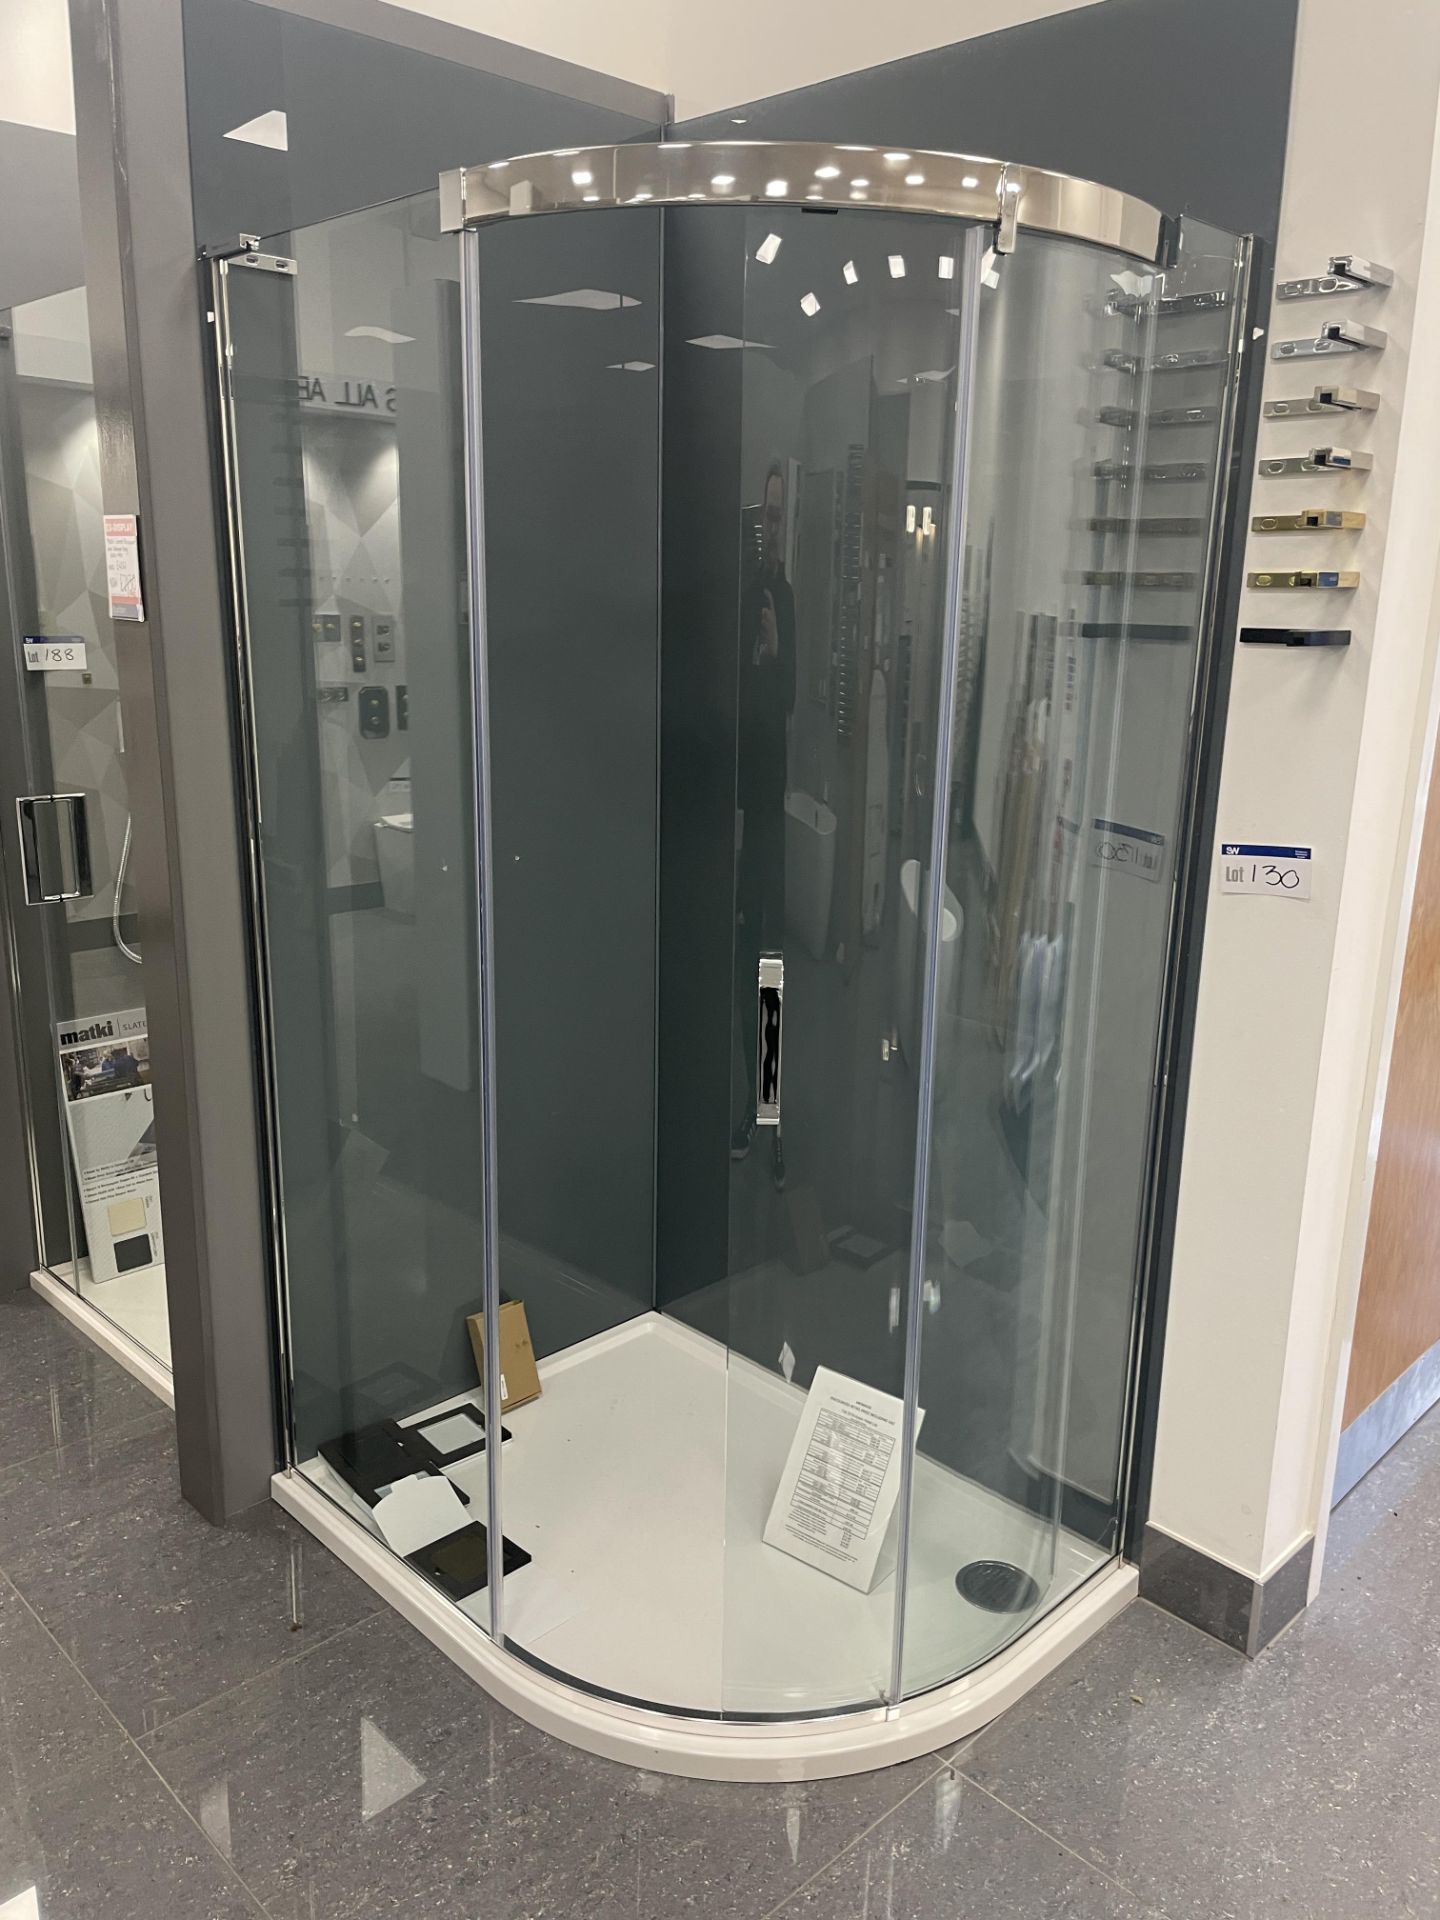 Sliding Door Shower Enclosure, approx. 1.2m x 800mm Please read the following important notes:- ***